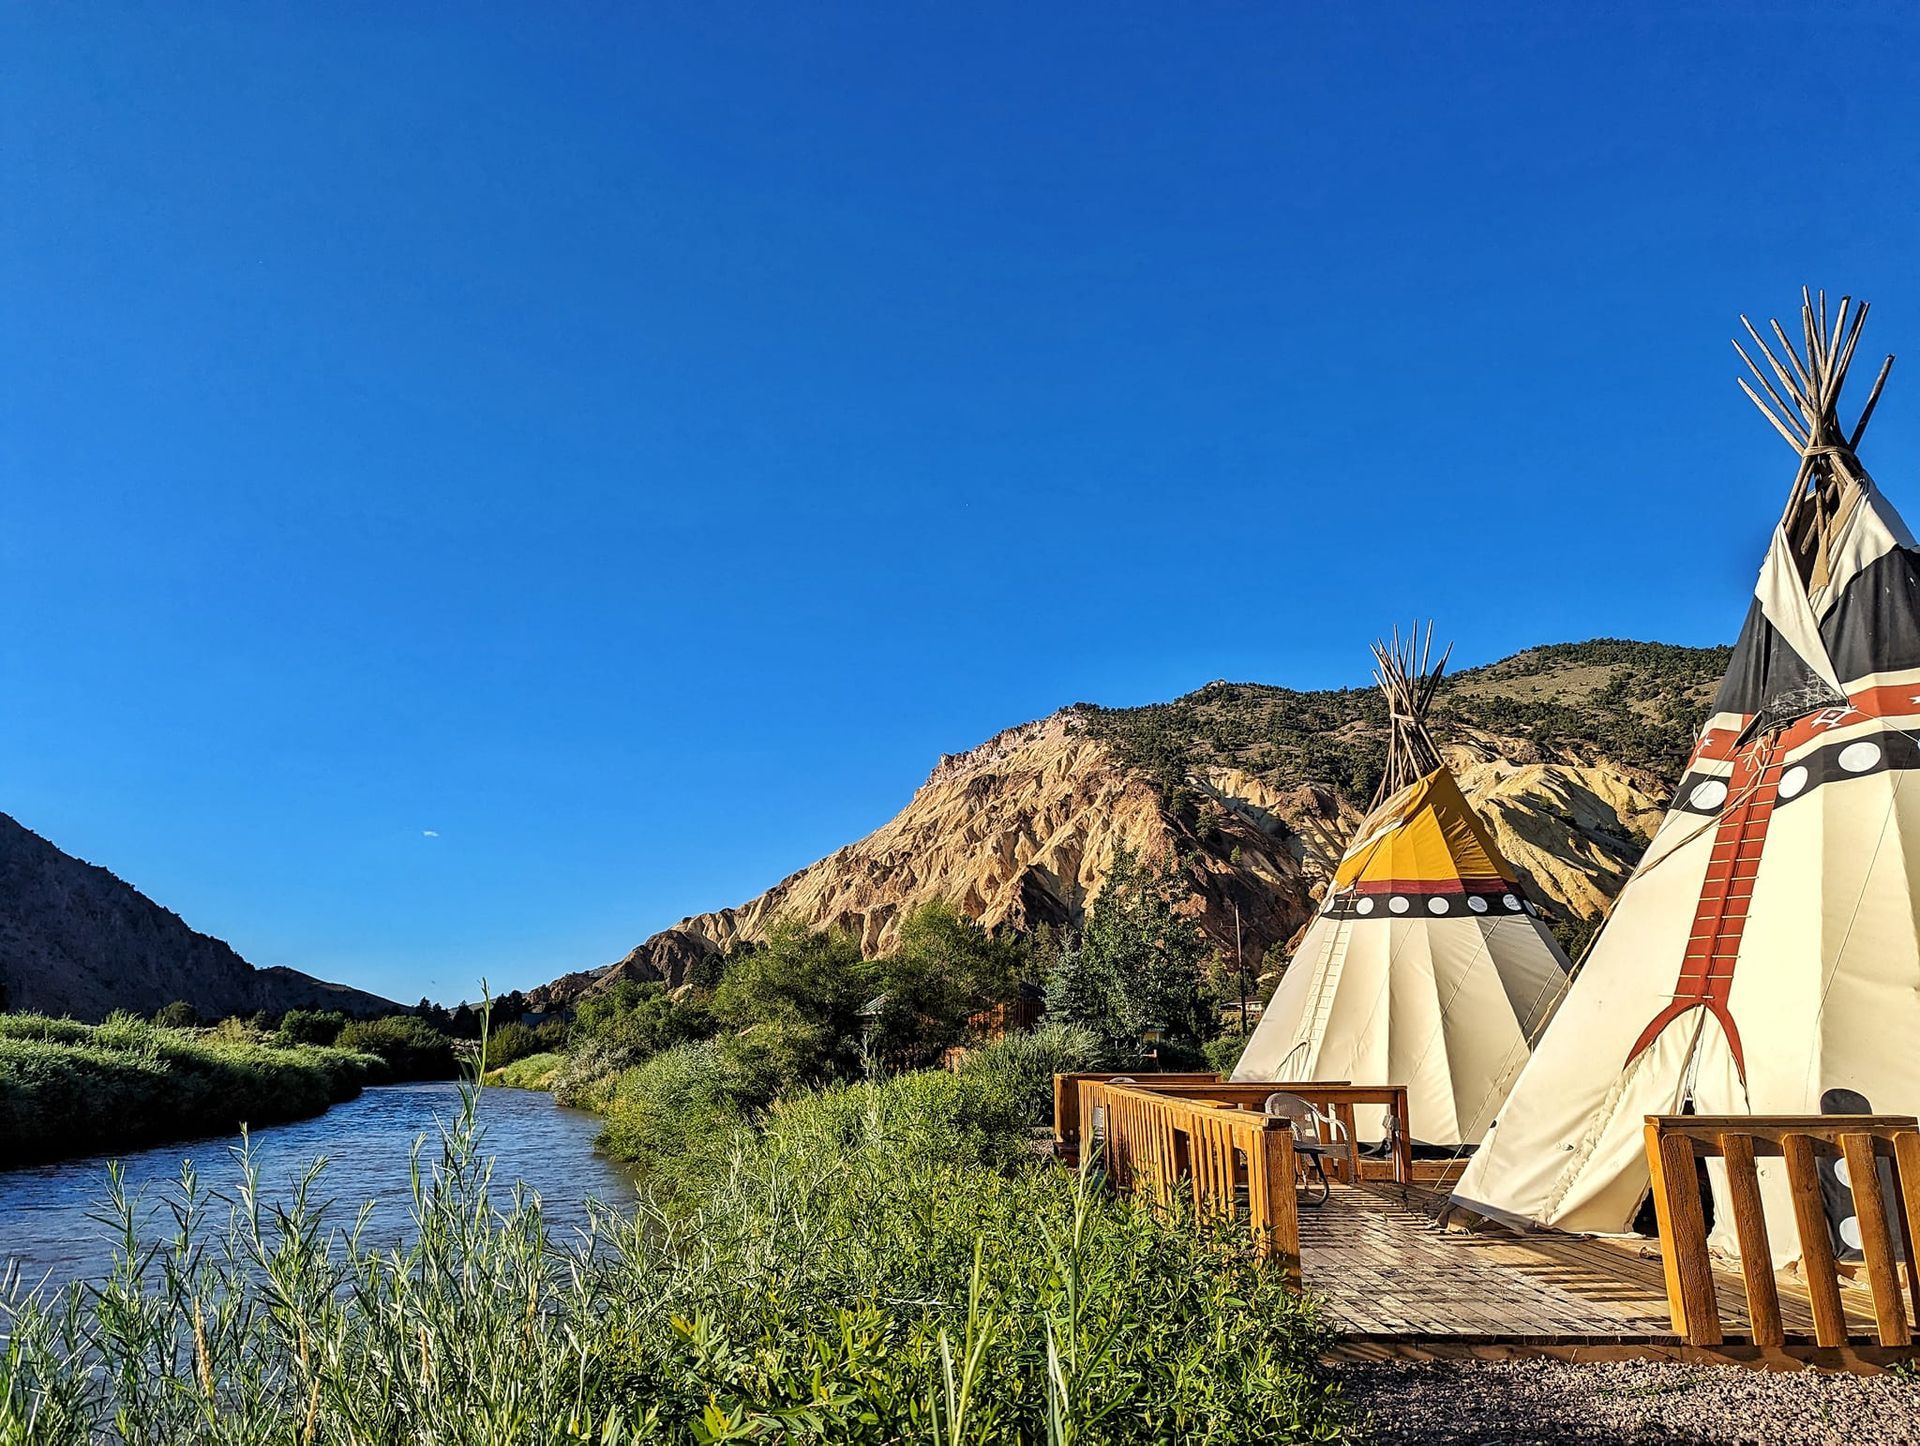 a couple of teepees sitting next to a river with mountains in the background .